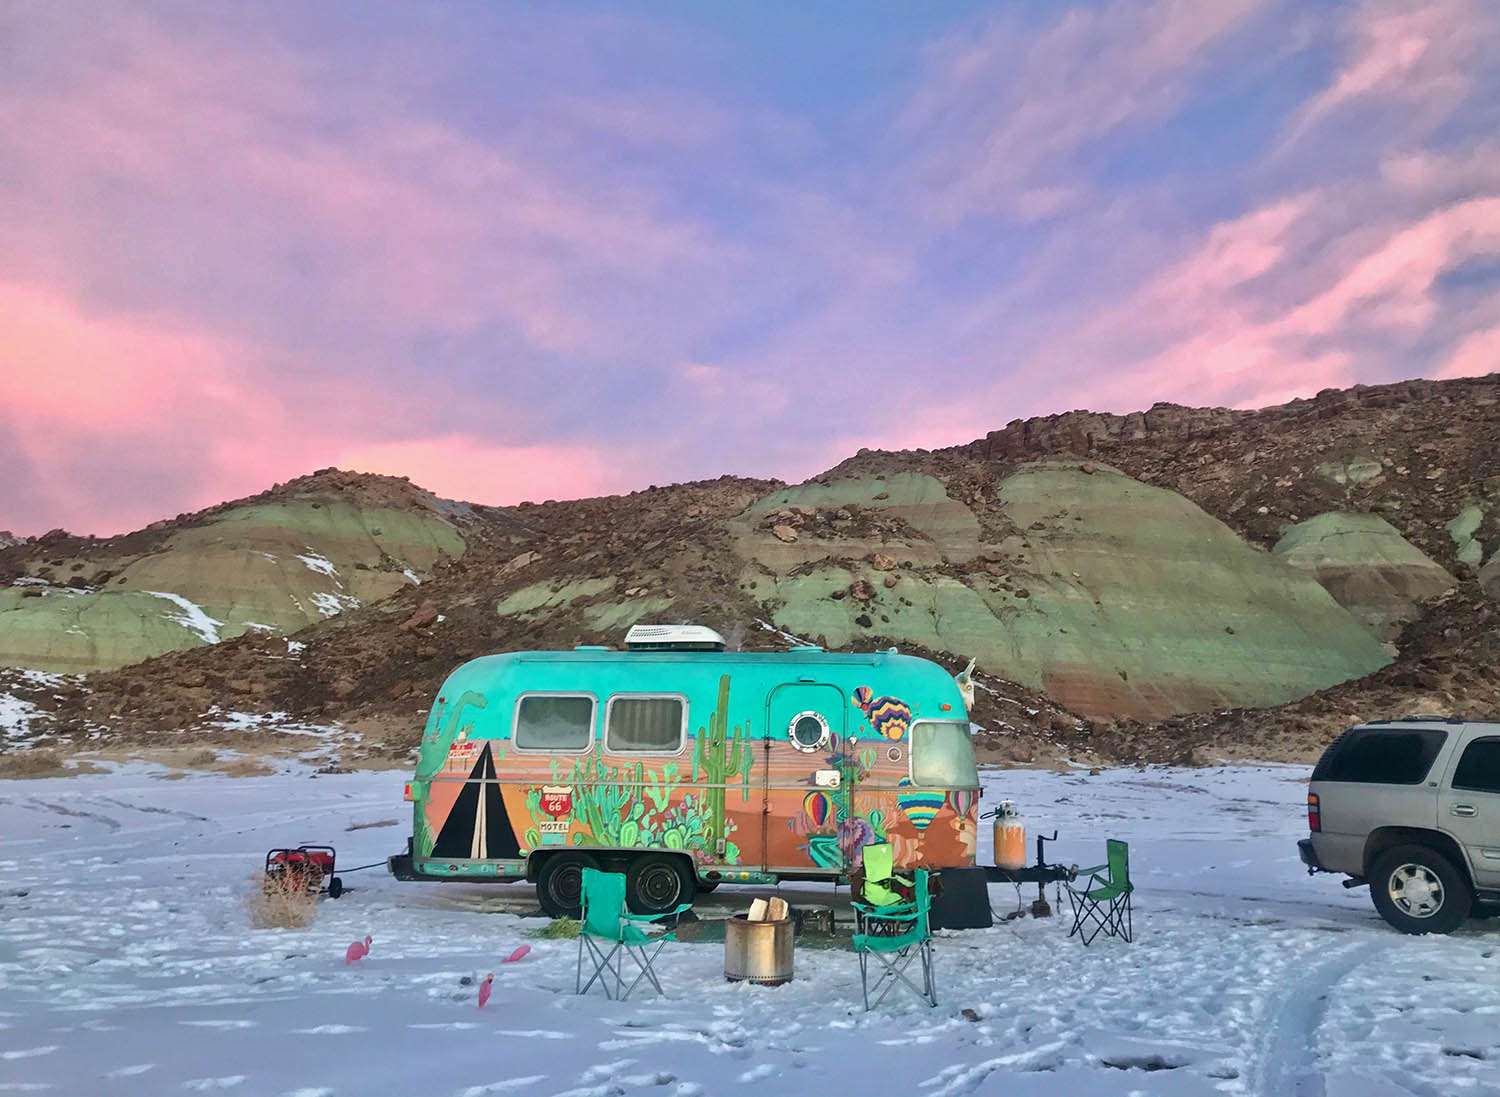 A colorful Aistream RV parked on a snowy expanse with stone ridge in the background.